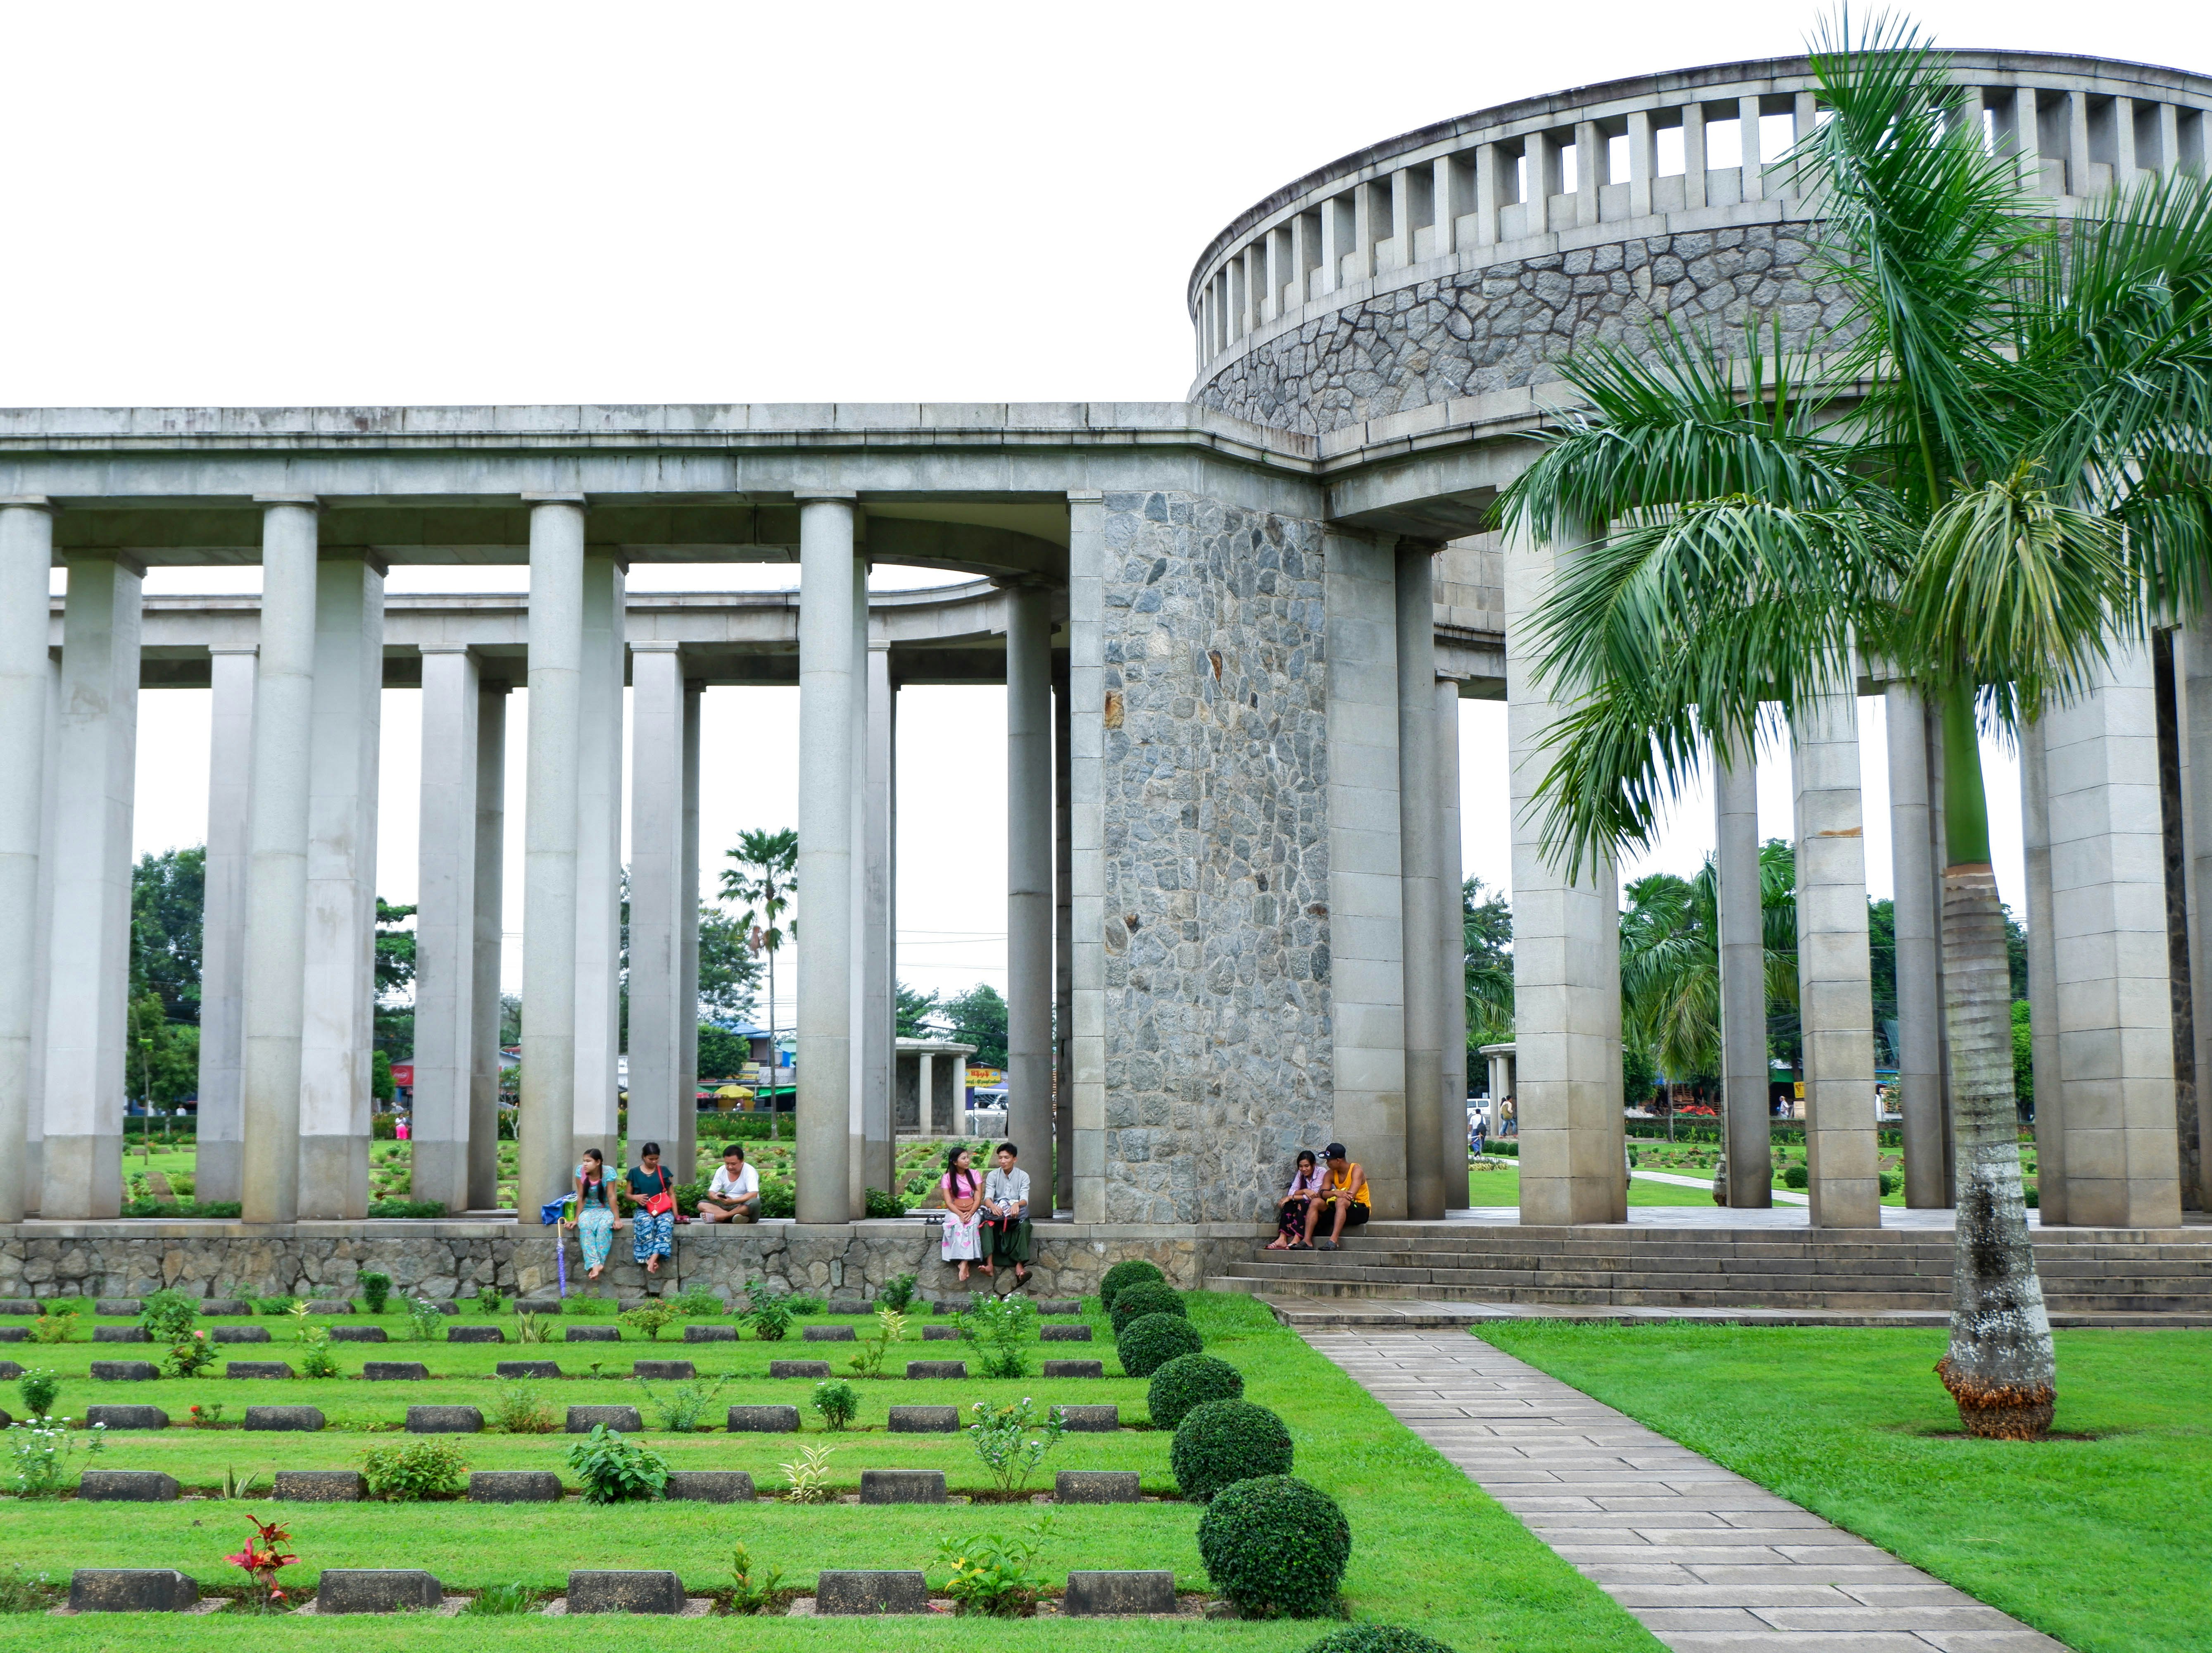 A few local people sit beneath the white stone pillars of Taukkyan War Cemetery's central monument. In the foreground numerous graves, with small headstones, are visible surrounded by manicured lawns.